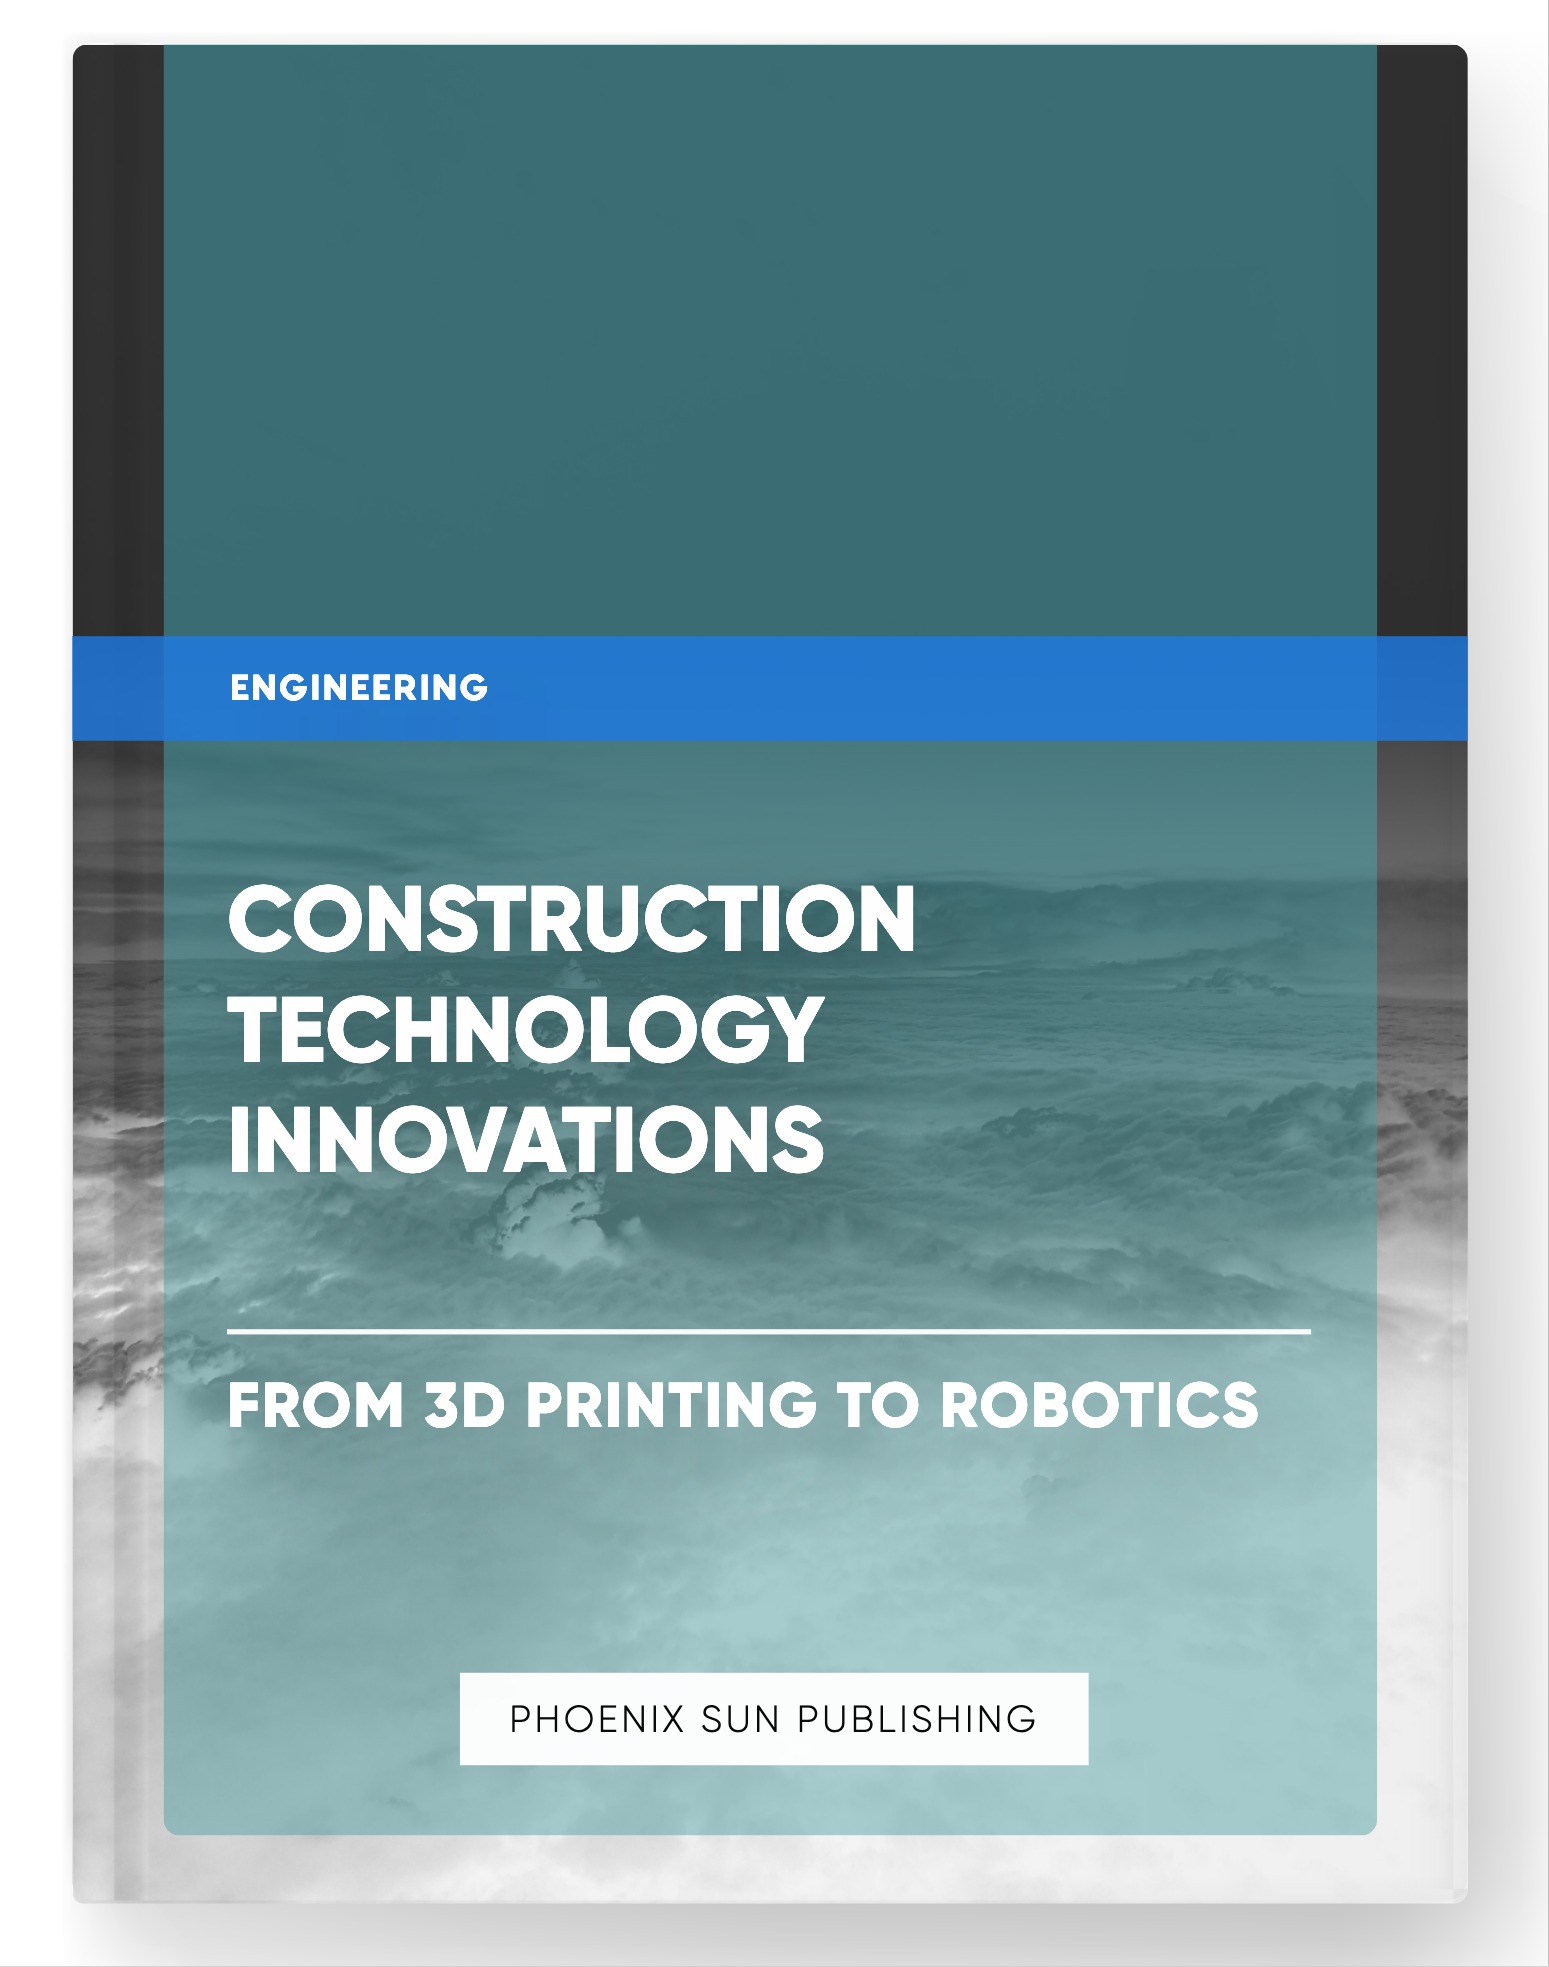 Construction Technology Innovations – From 3D Printing to Robotics